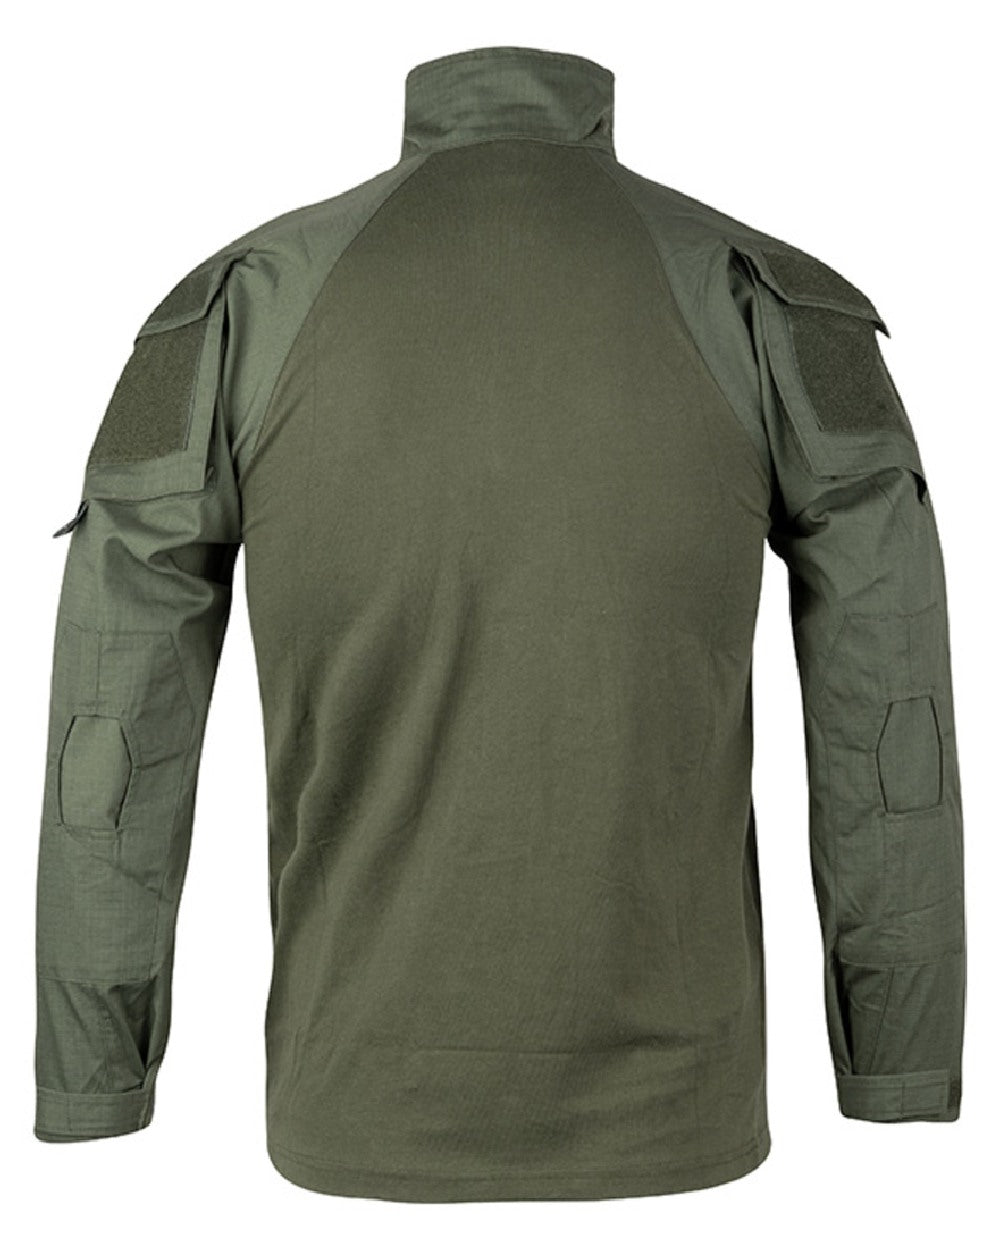 Viper Special Ops Shirt in VCAM Green 